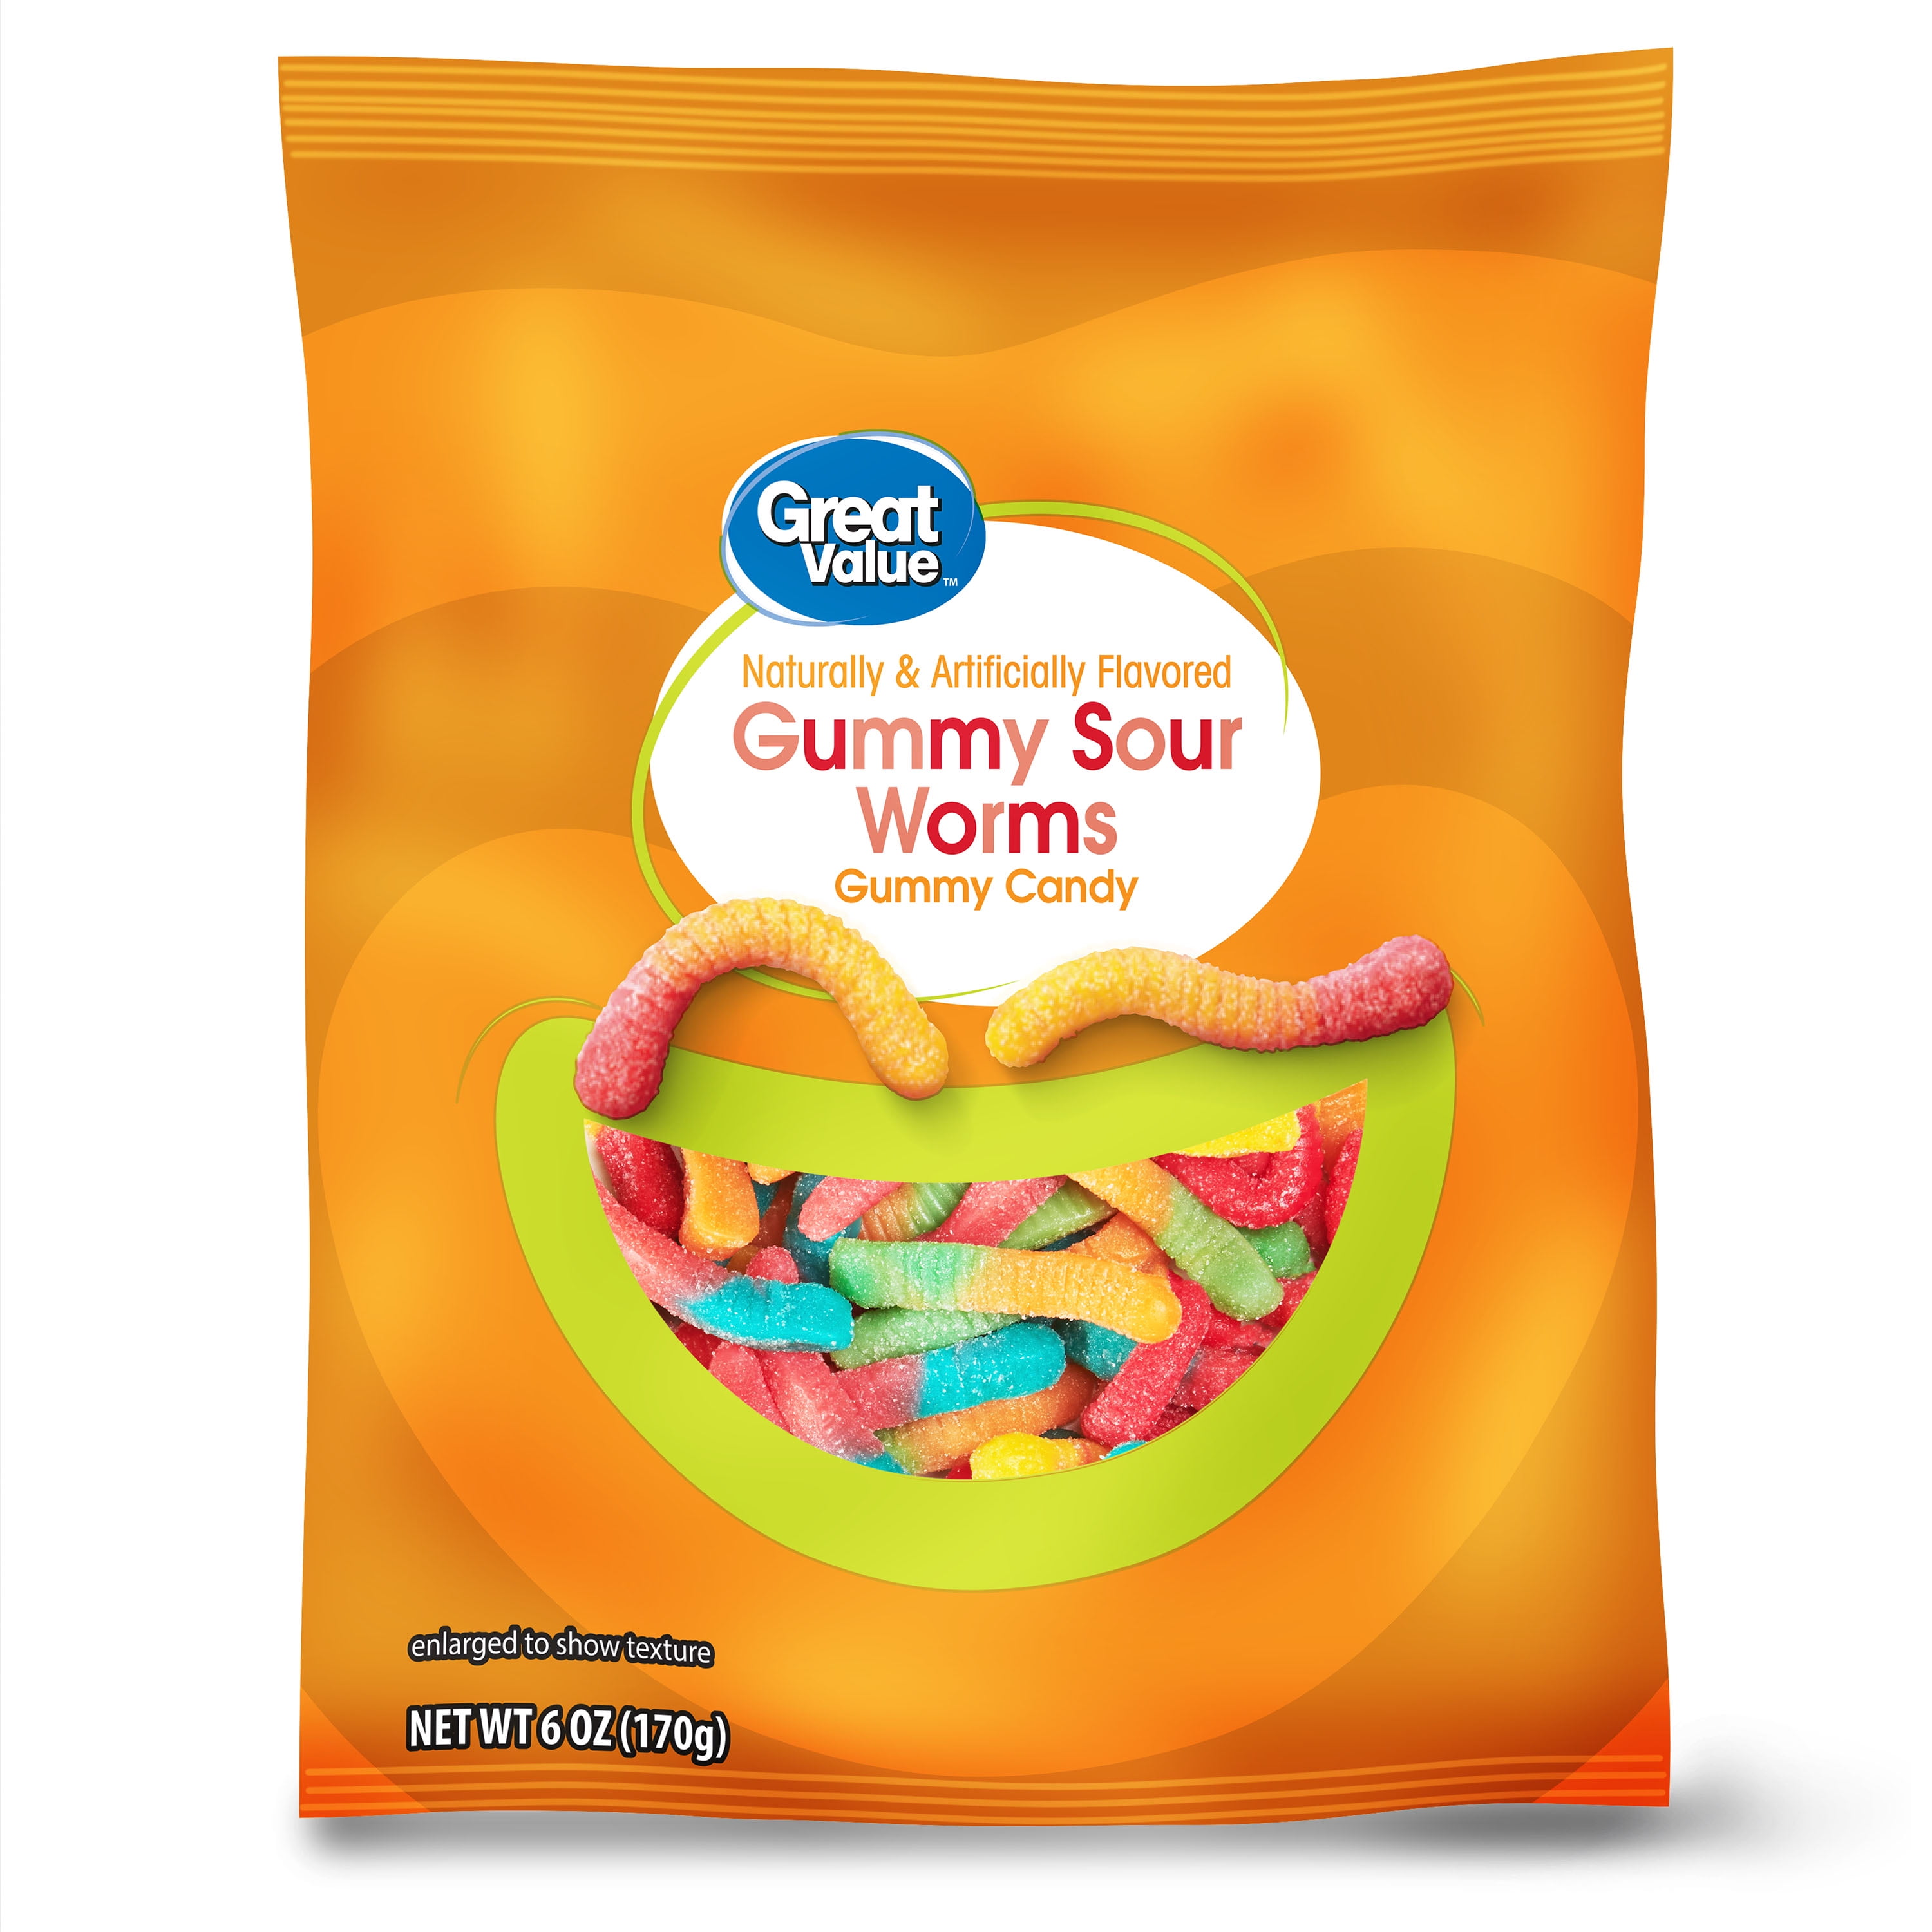 Great Value Sour Gummy Worms Chewy Candy, 6 oz